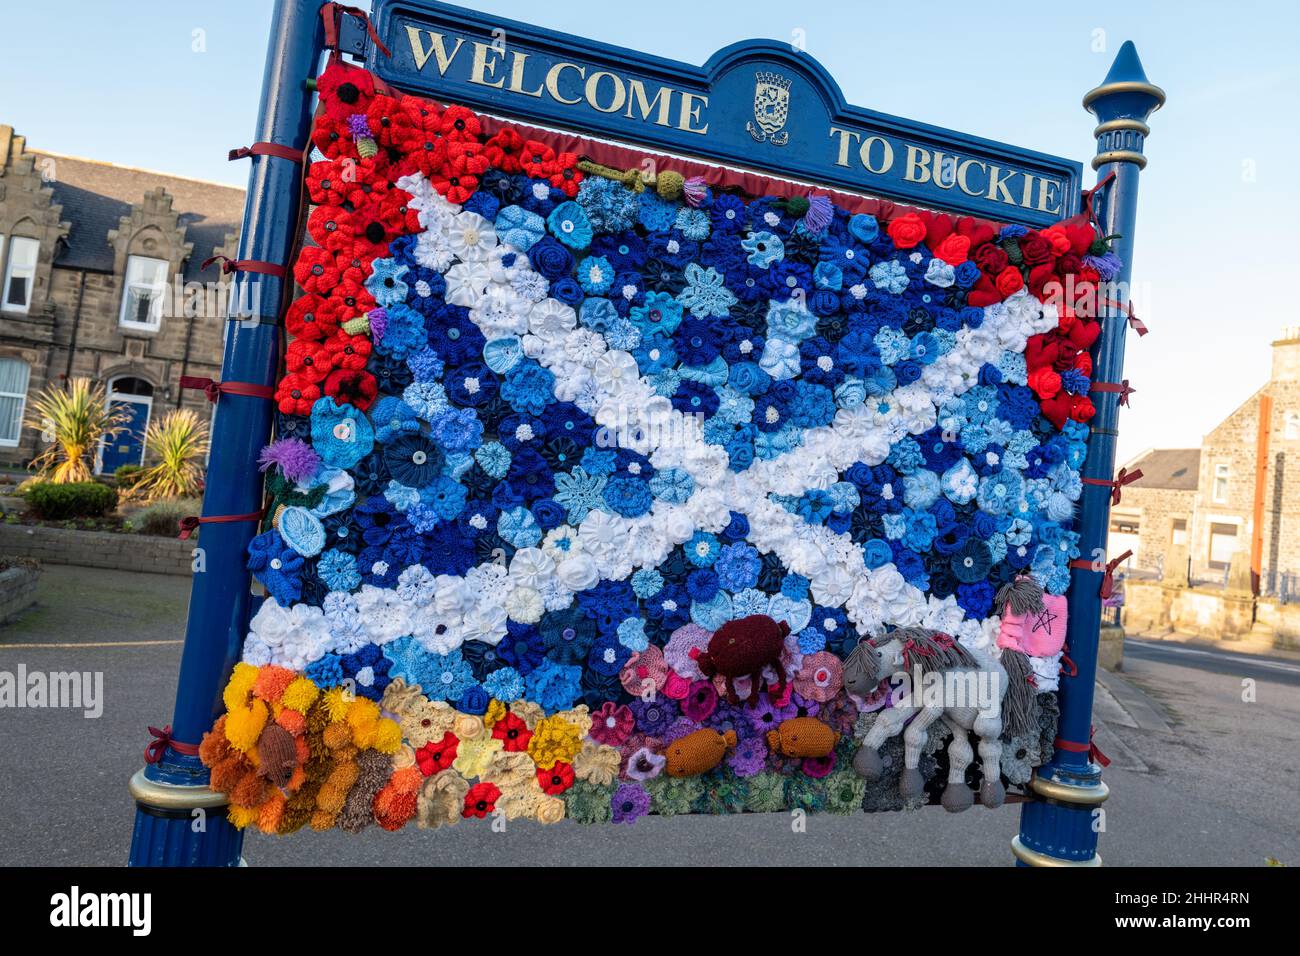 BUCKIE, MORAY, UK. 21st Jan, 2022. This is the Auld Lang Syne Panel on Display within Cluny Square. The Panel was formed with knitted, crochet and sewed by the following Groups, Crafty Roots, Buckie Rainbows, Buckie Community Shop and Bee So Crafty the Friday Crochet Class. The Panel is pay tribute to Robbie Burns re To A Mouse, Address to a Haggis, Tam O'Shanter and a Red, Red Rose. The Panel is on display in Cluny Square, the town centre of Buckie, Moray, Scotland. Credit: JASPERIMAGE/Alamy Live News Stock Photo